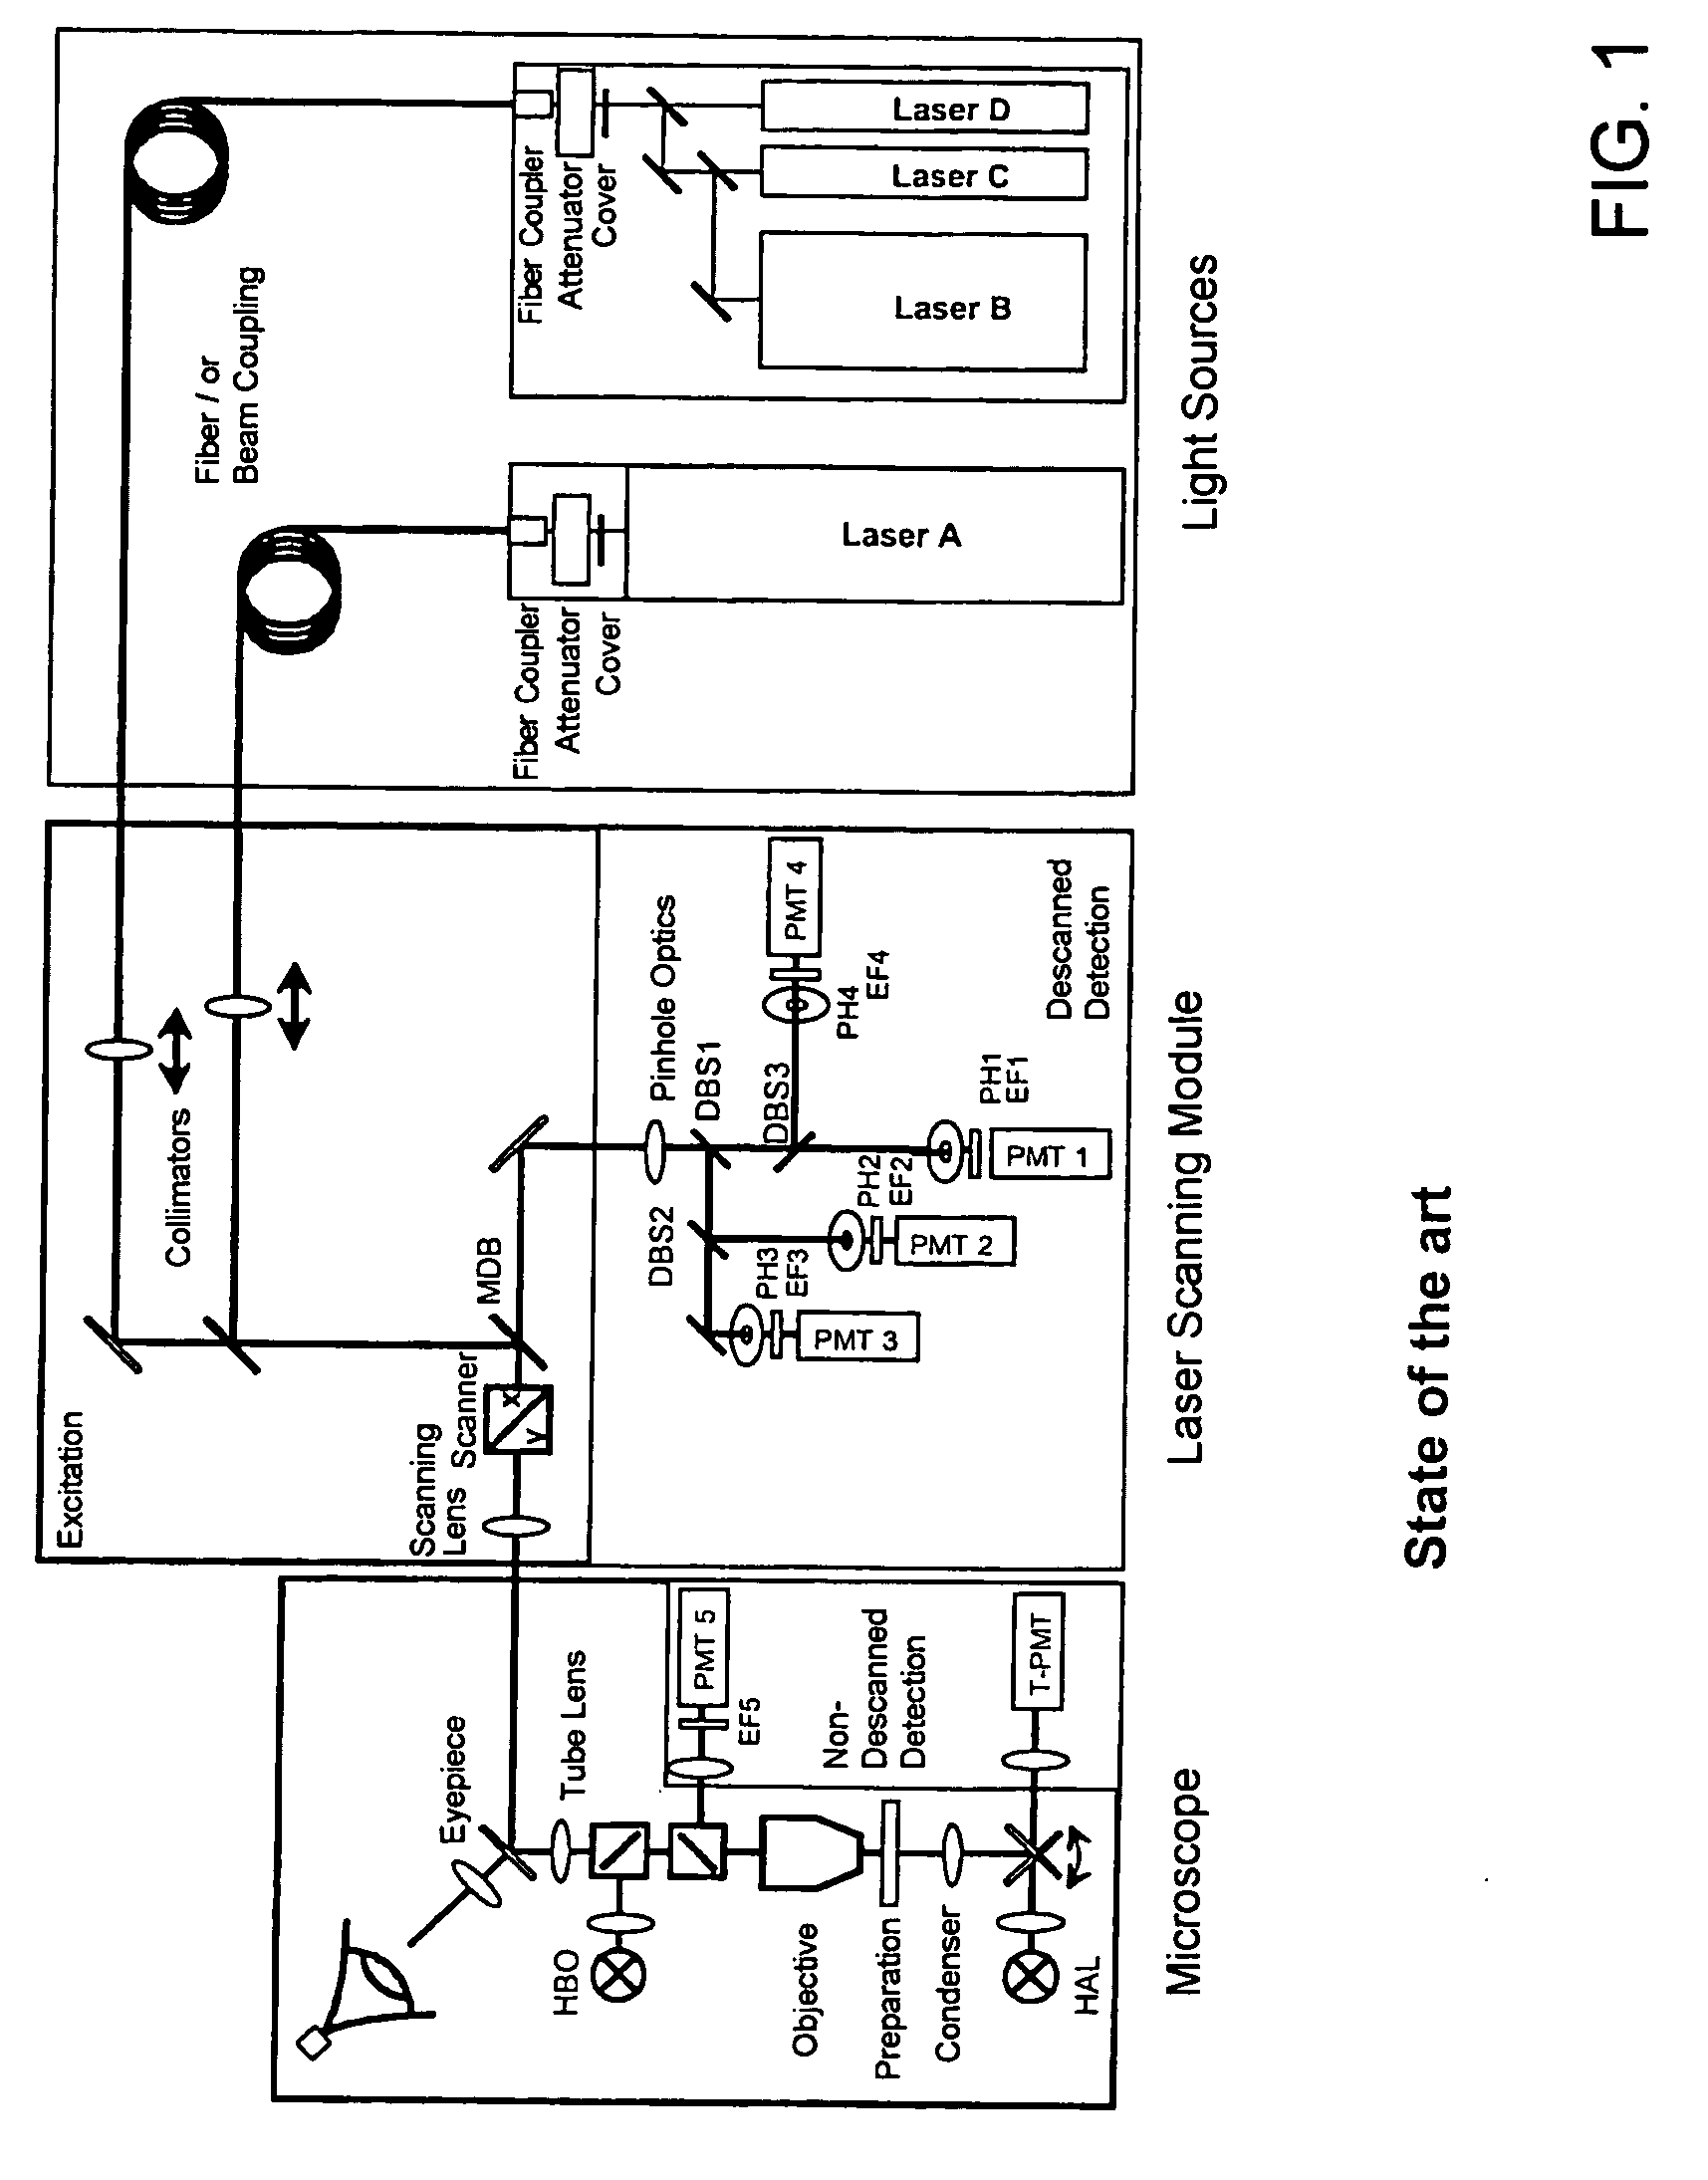 Device for controlling light radiation